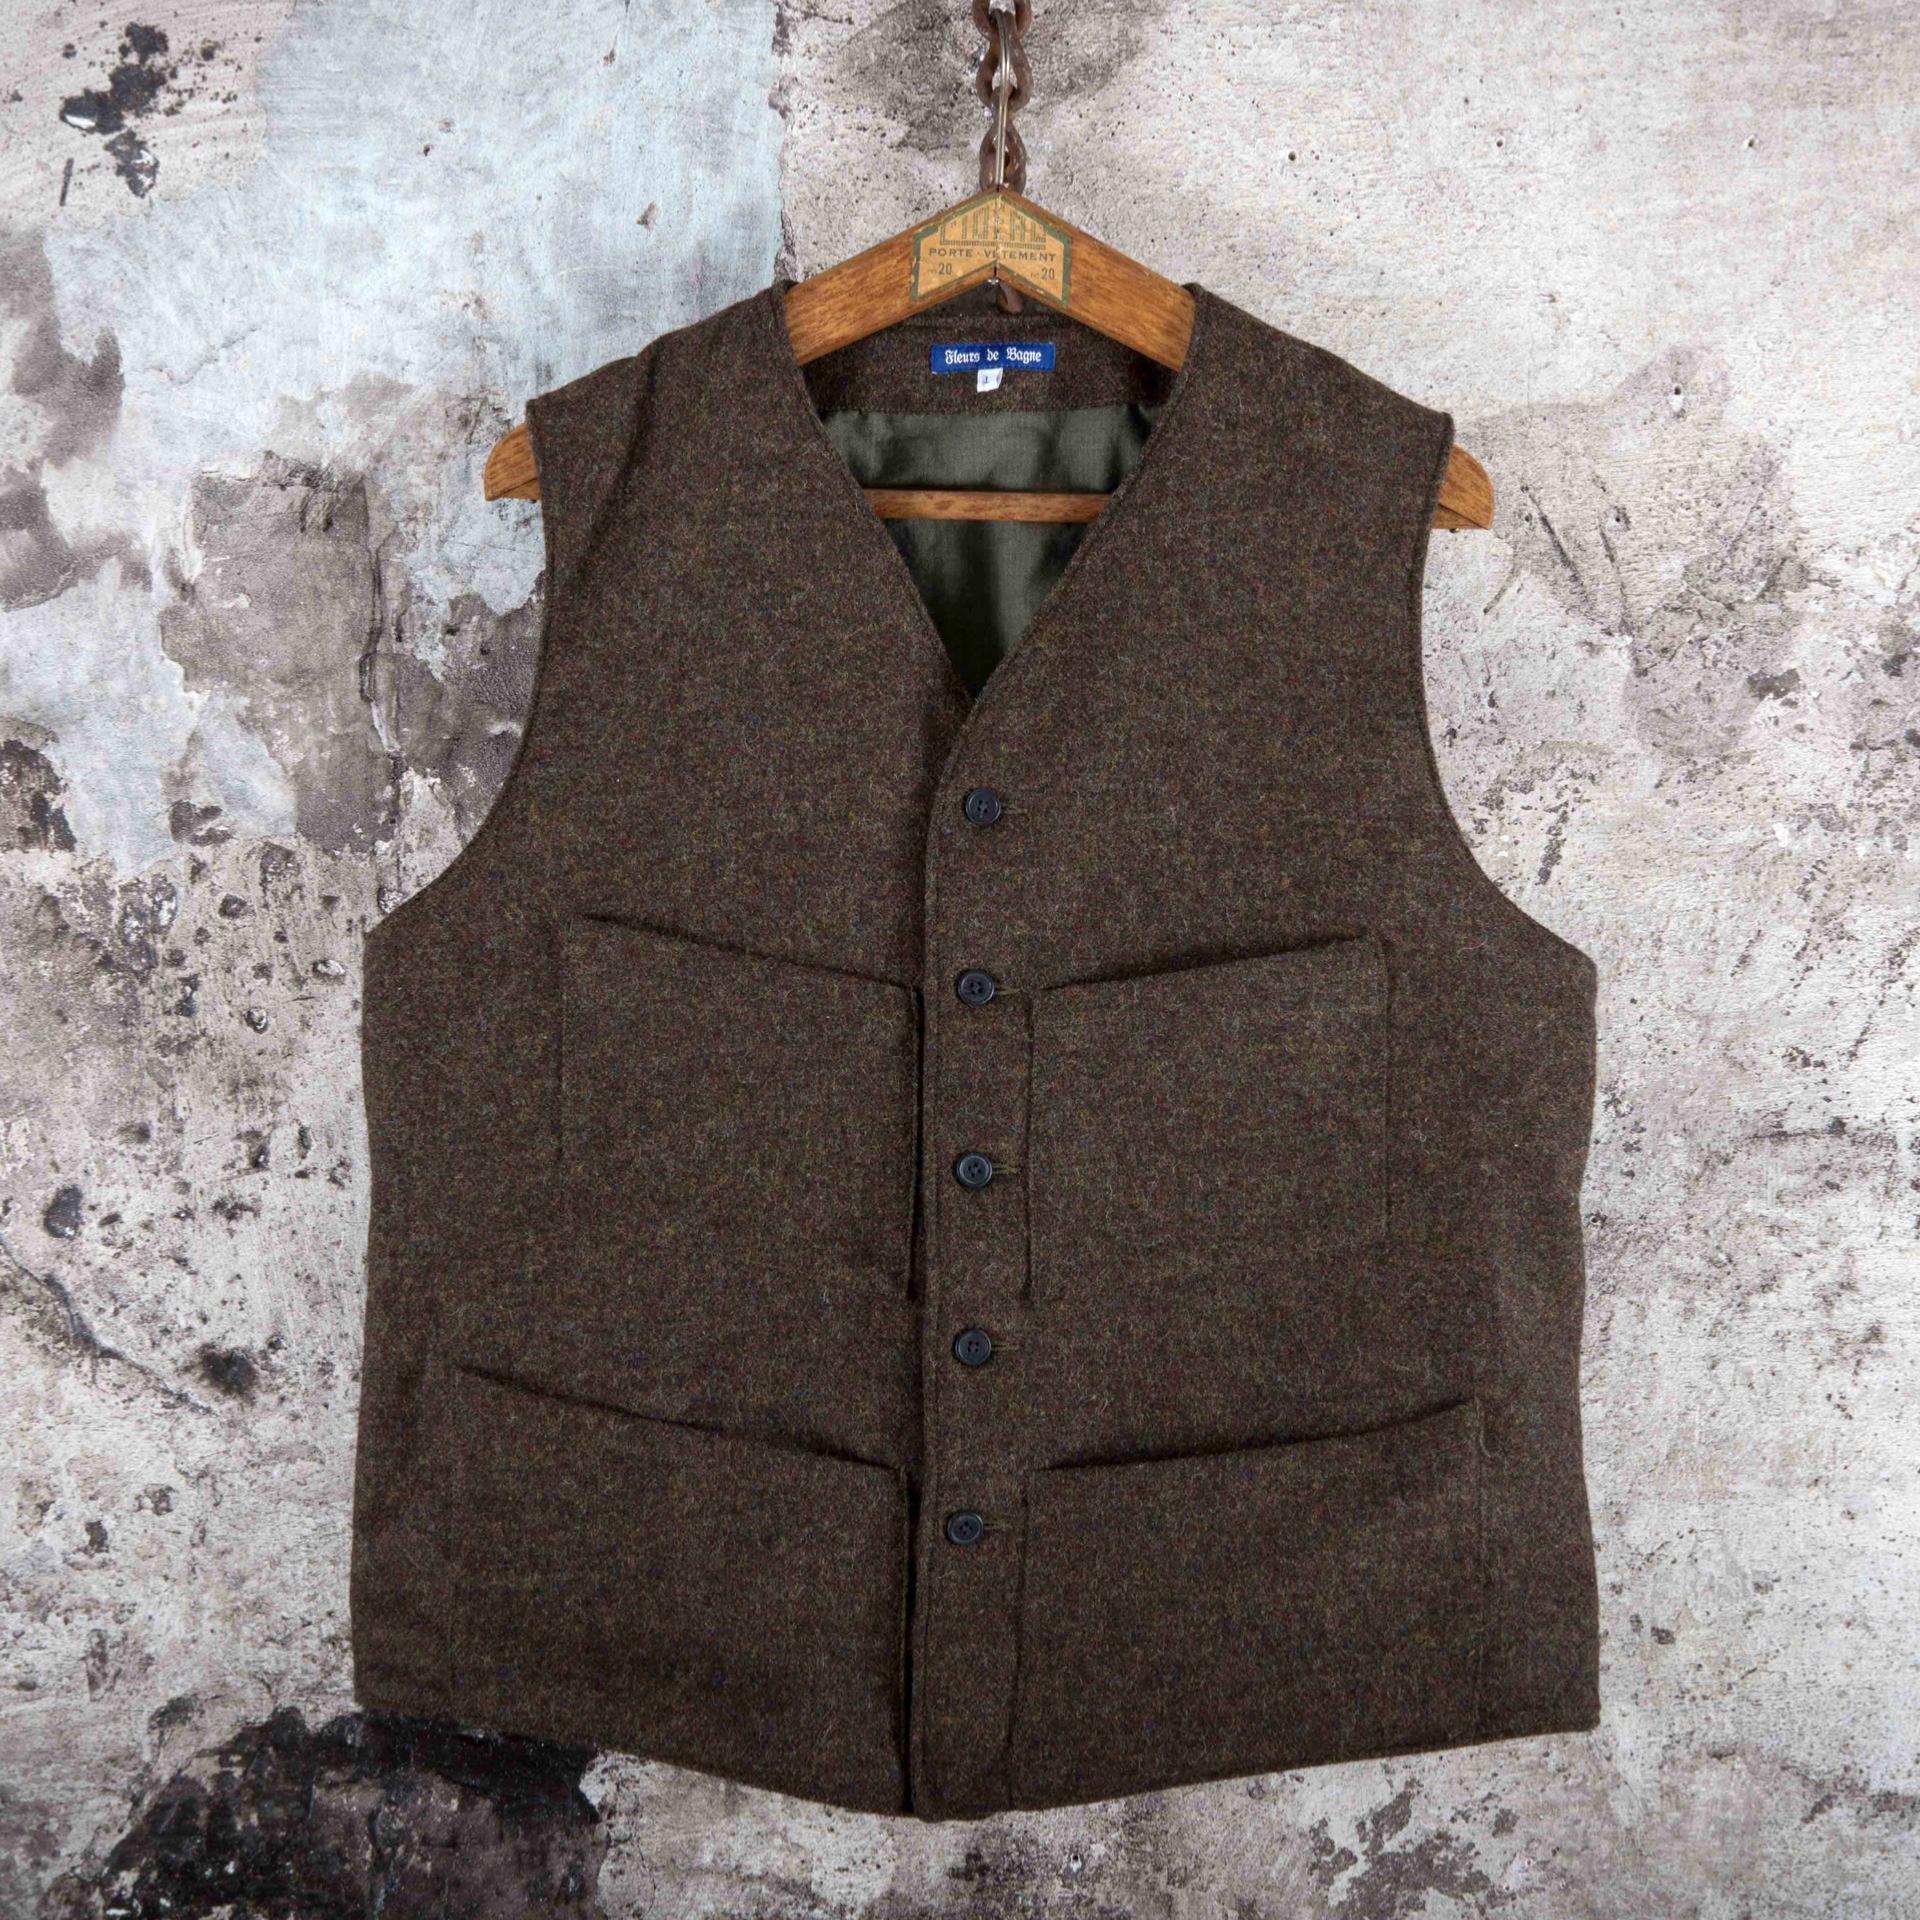 THE MILORD VEST